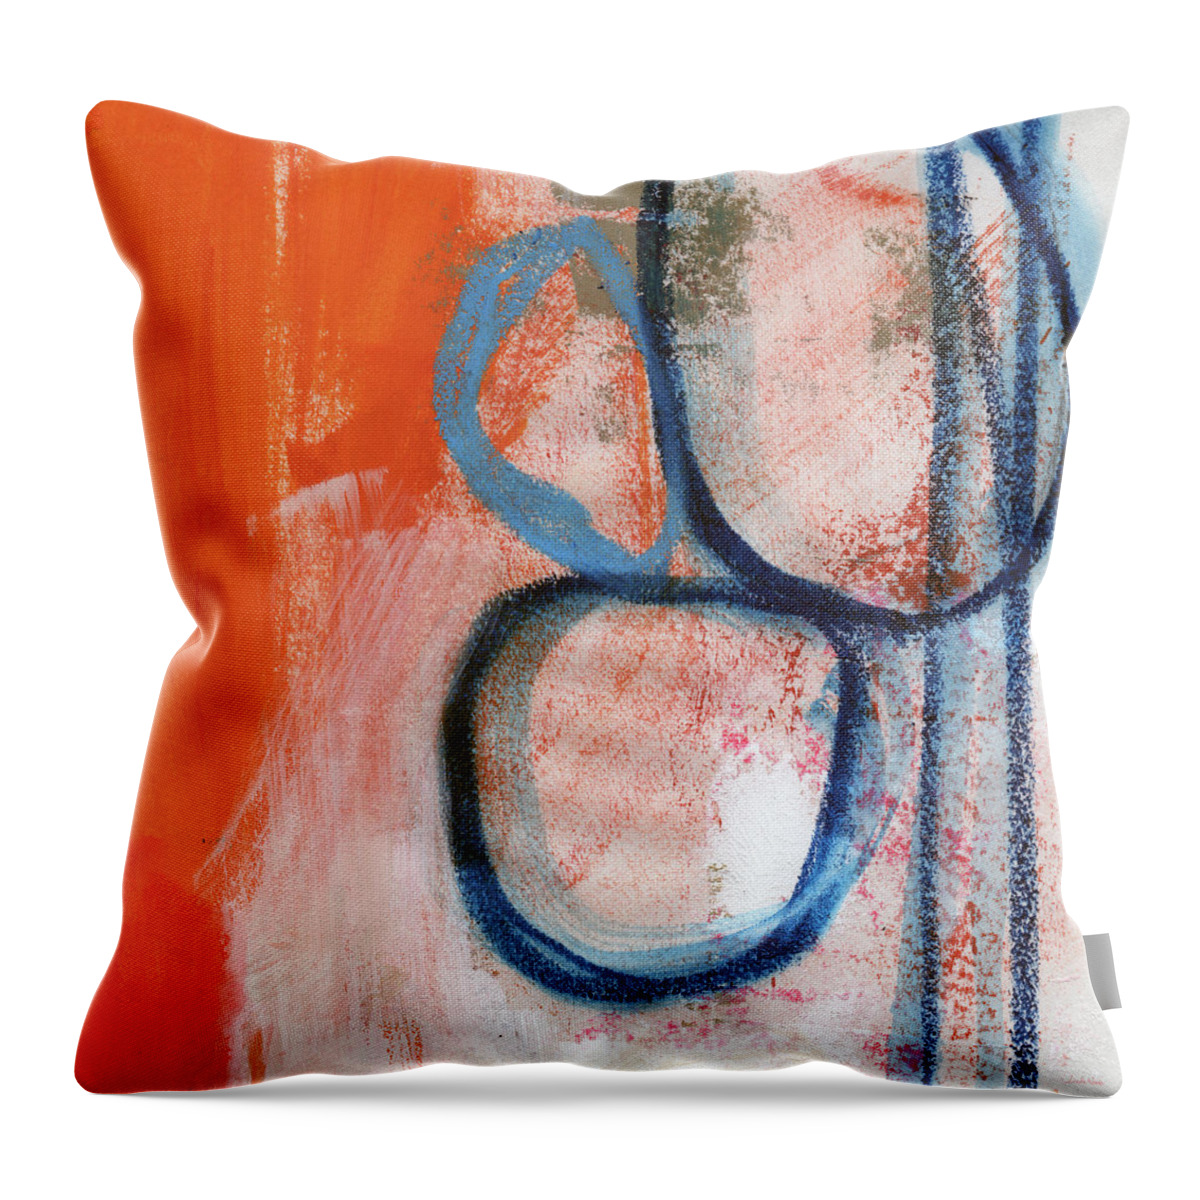 Contemporary Abstract Throw Pillow featuring the painting Tender Mercies by Linda Woods